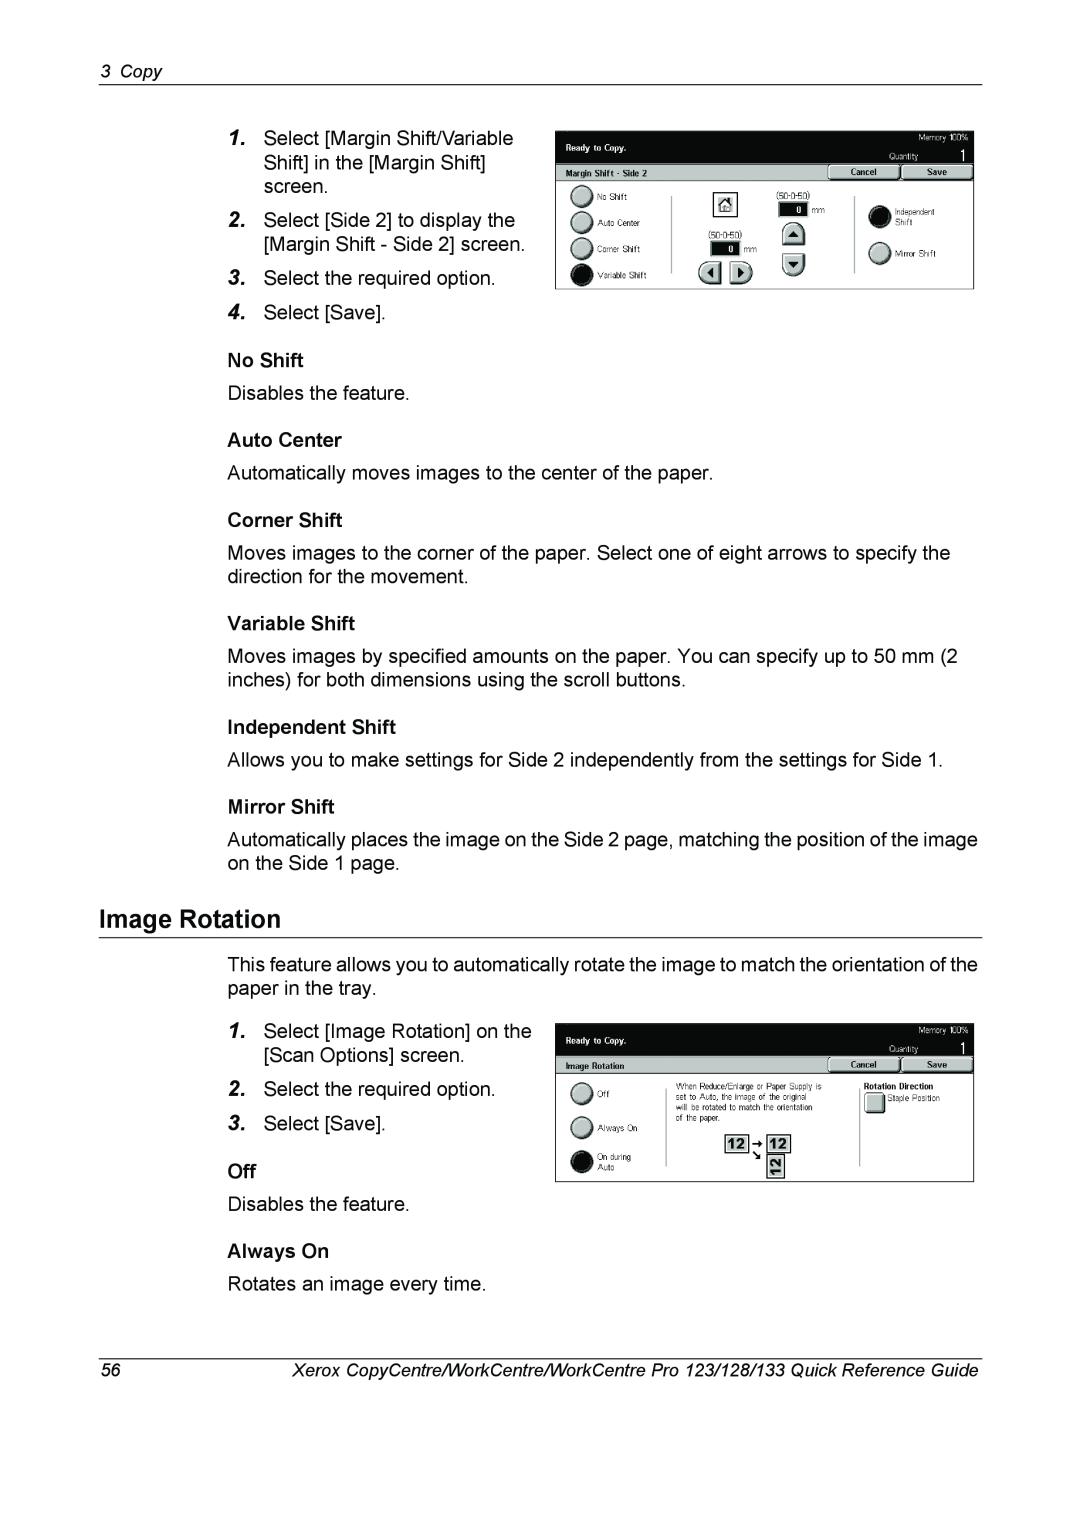 Xerox 604P18037 manual Image Rotation, Independent Shift, Mirror Shift, Always On, No Shift, Auto Center, Corner Shift 